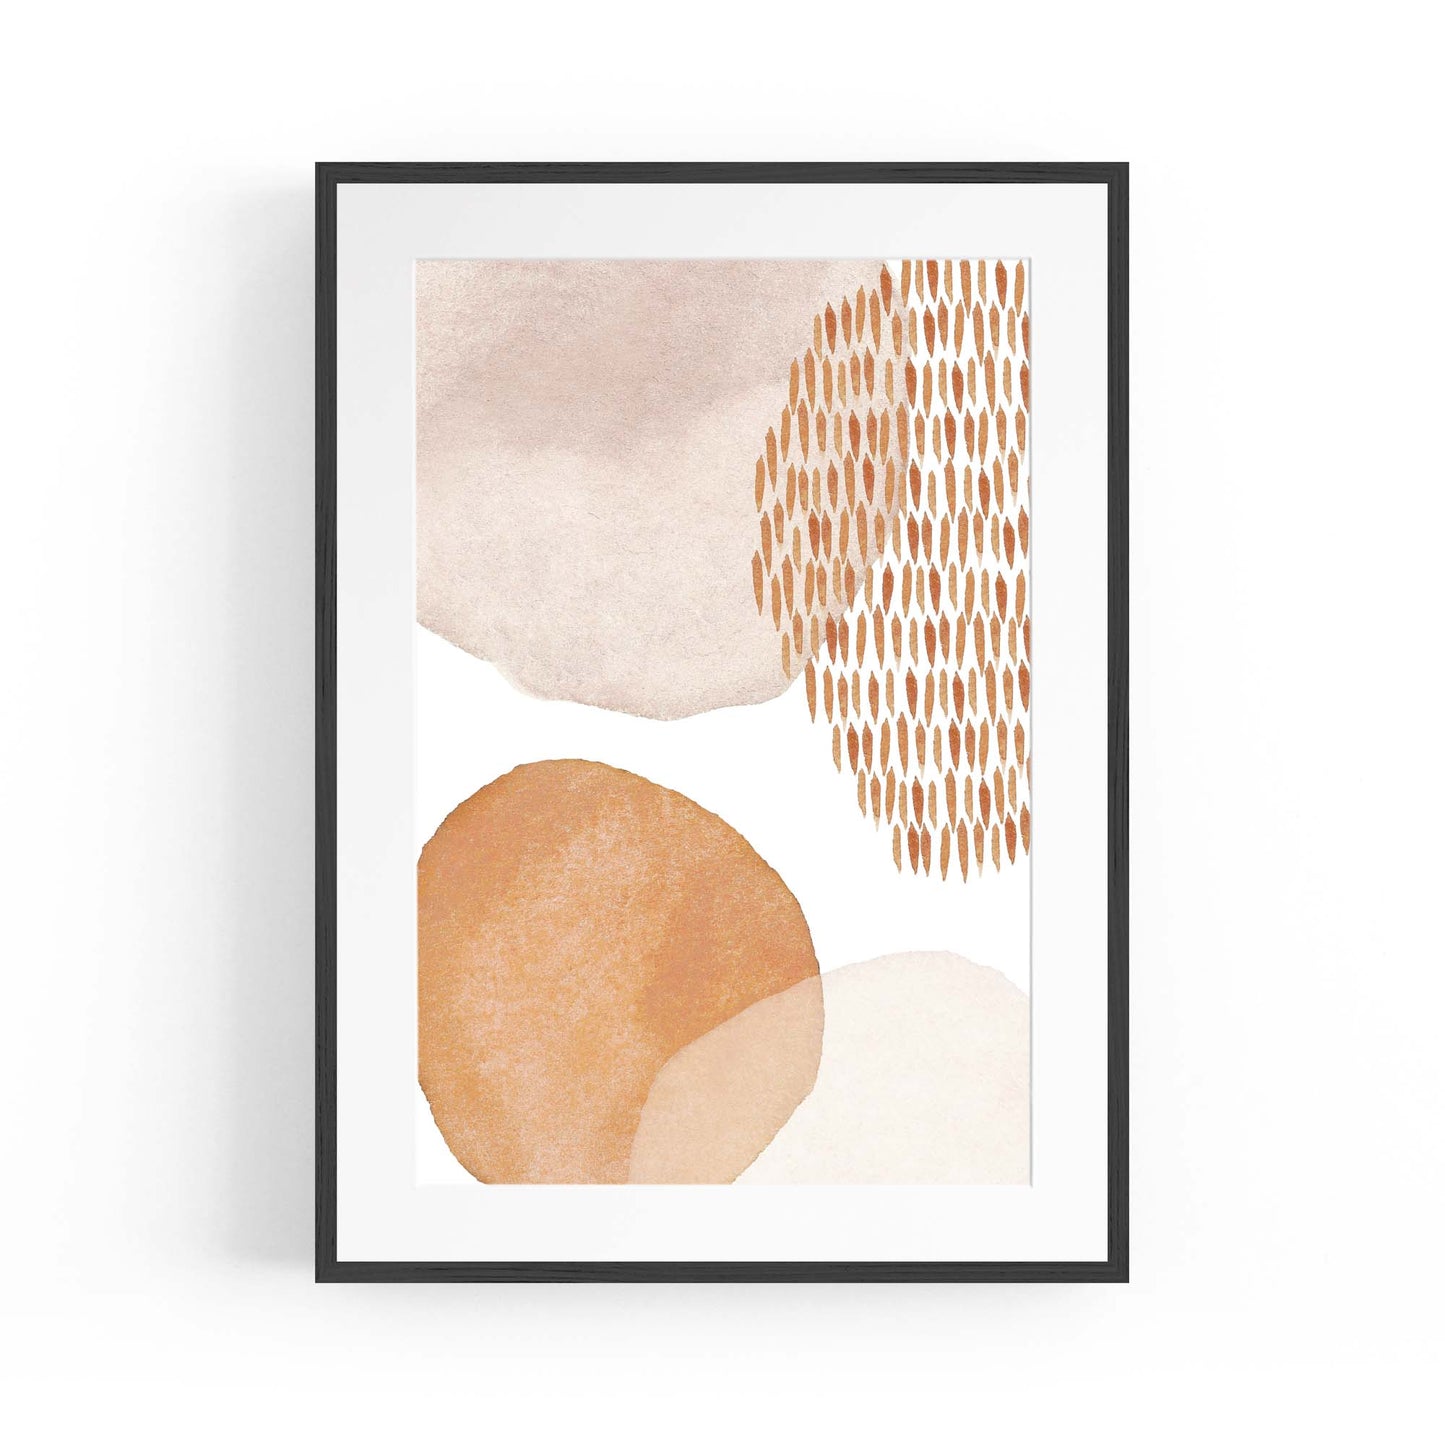 Abstract Modern Watercolour Shapes Painting Wall Art #15 - The Affordable Art Company